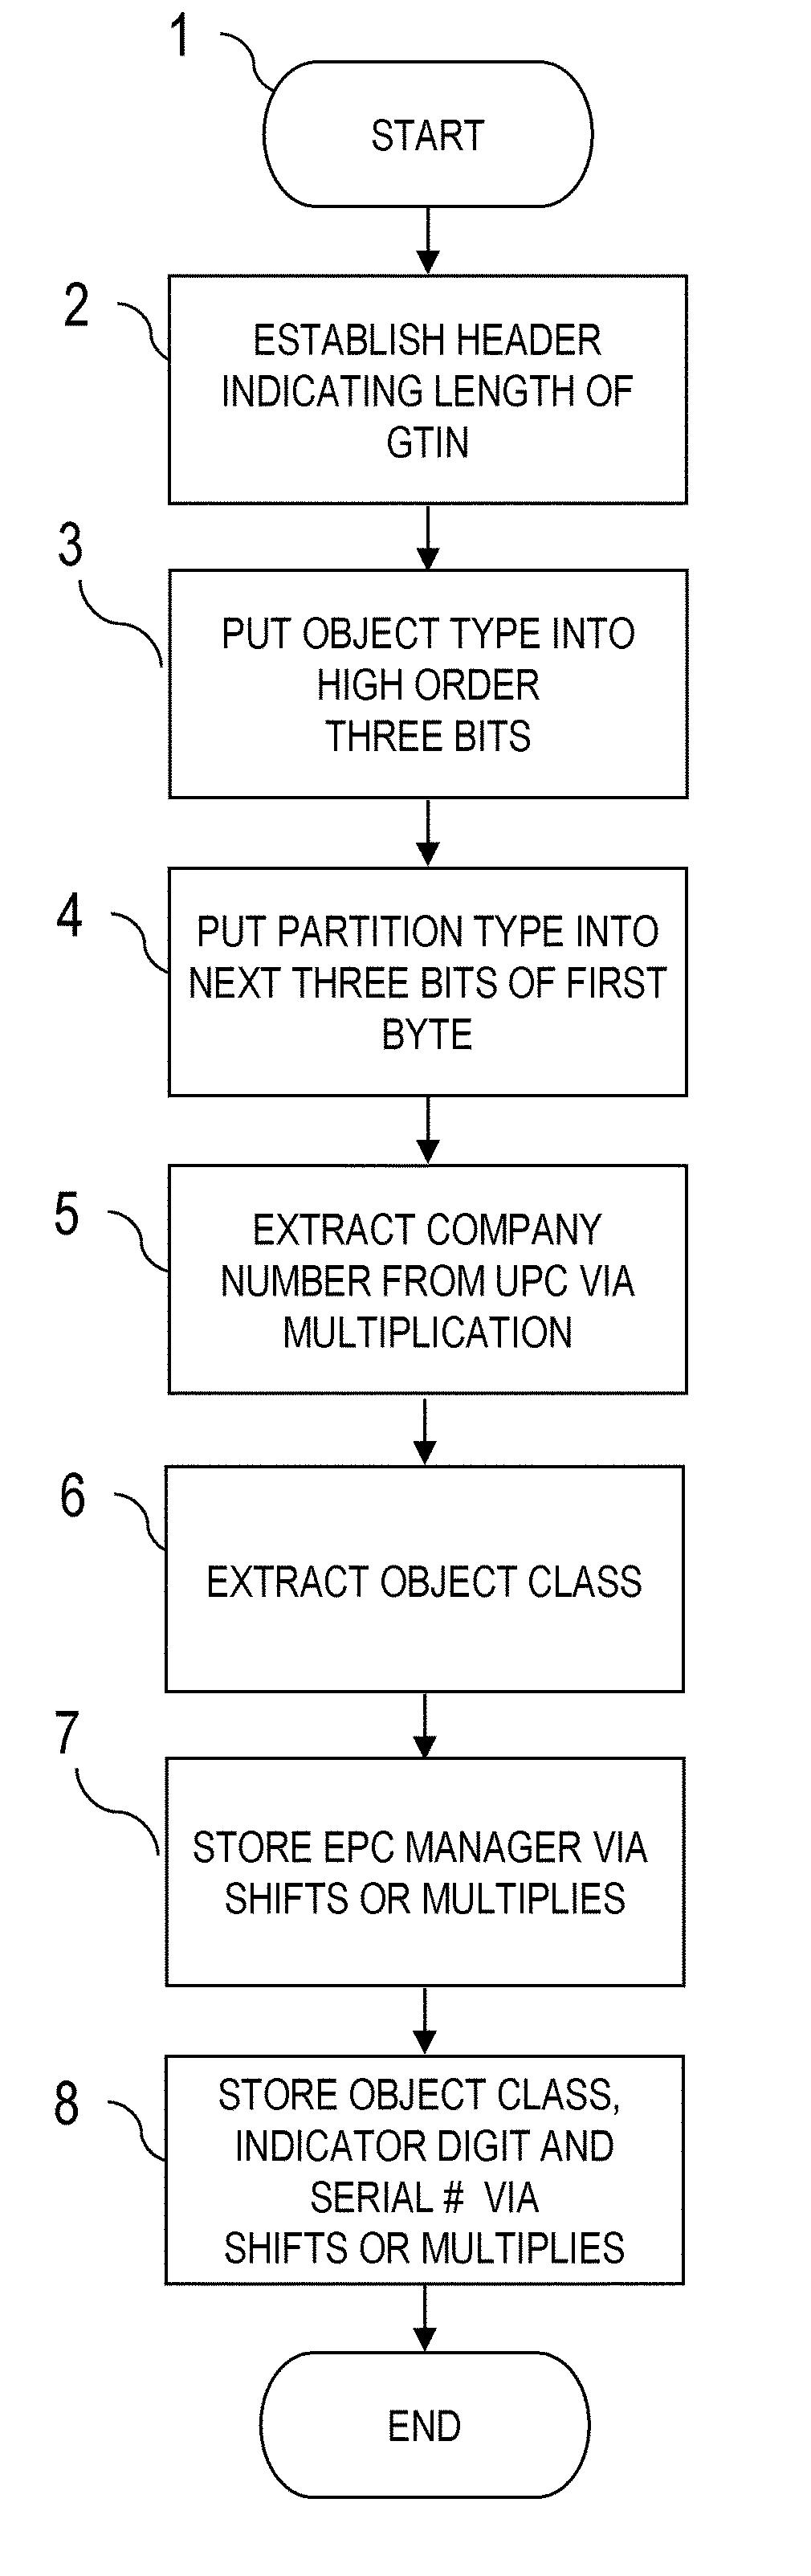 Universal product code conversion to electronic product code